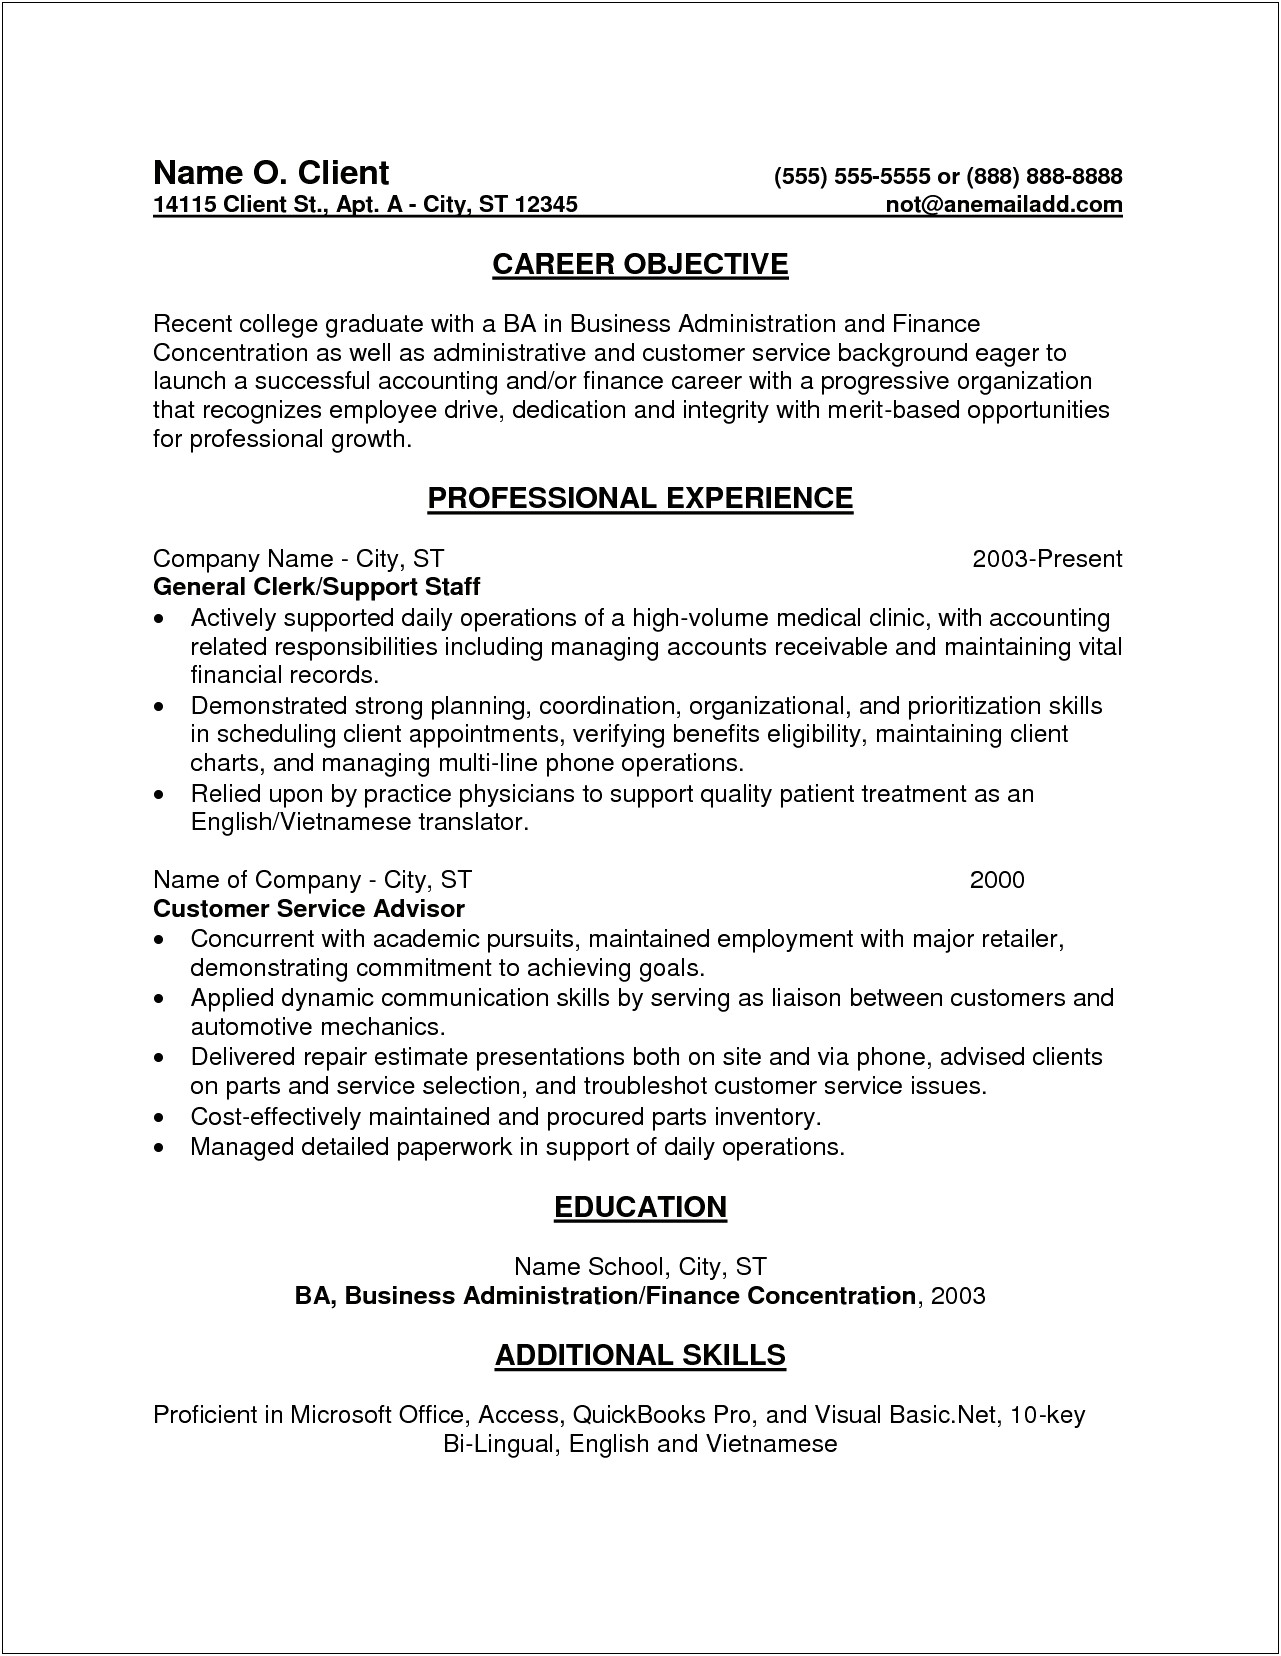 Resume Career Objective Examples Entry Level